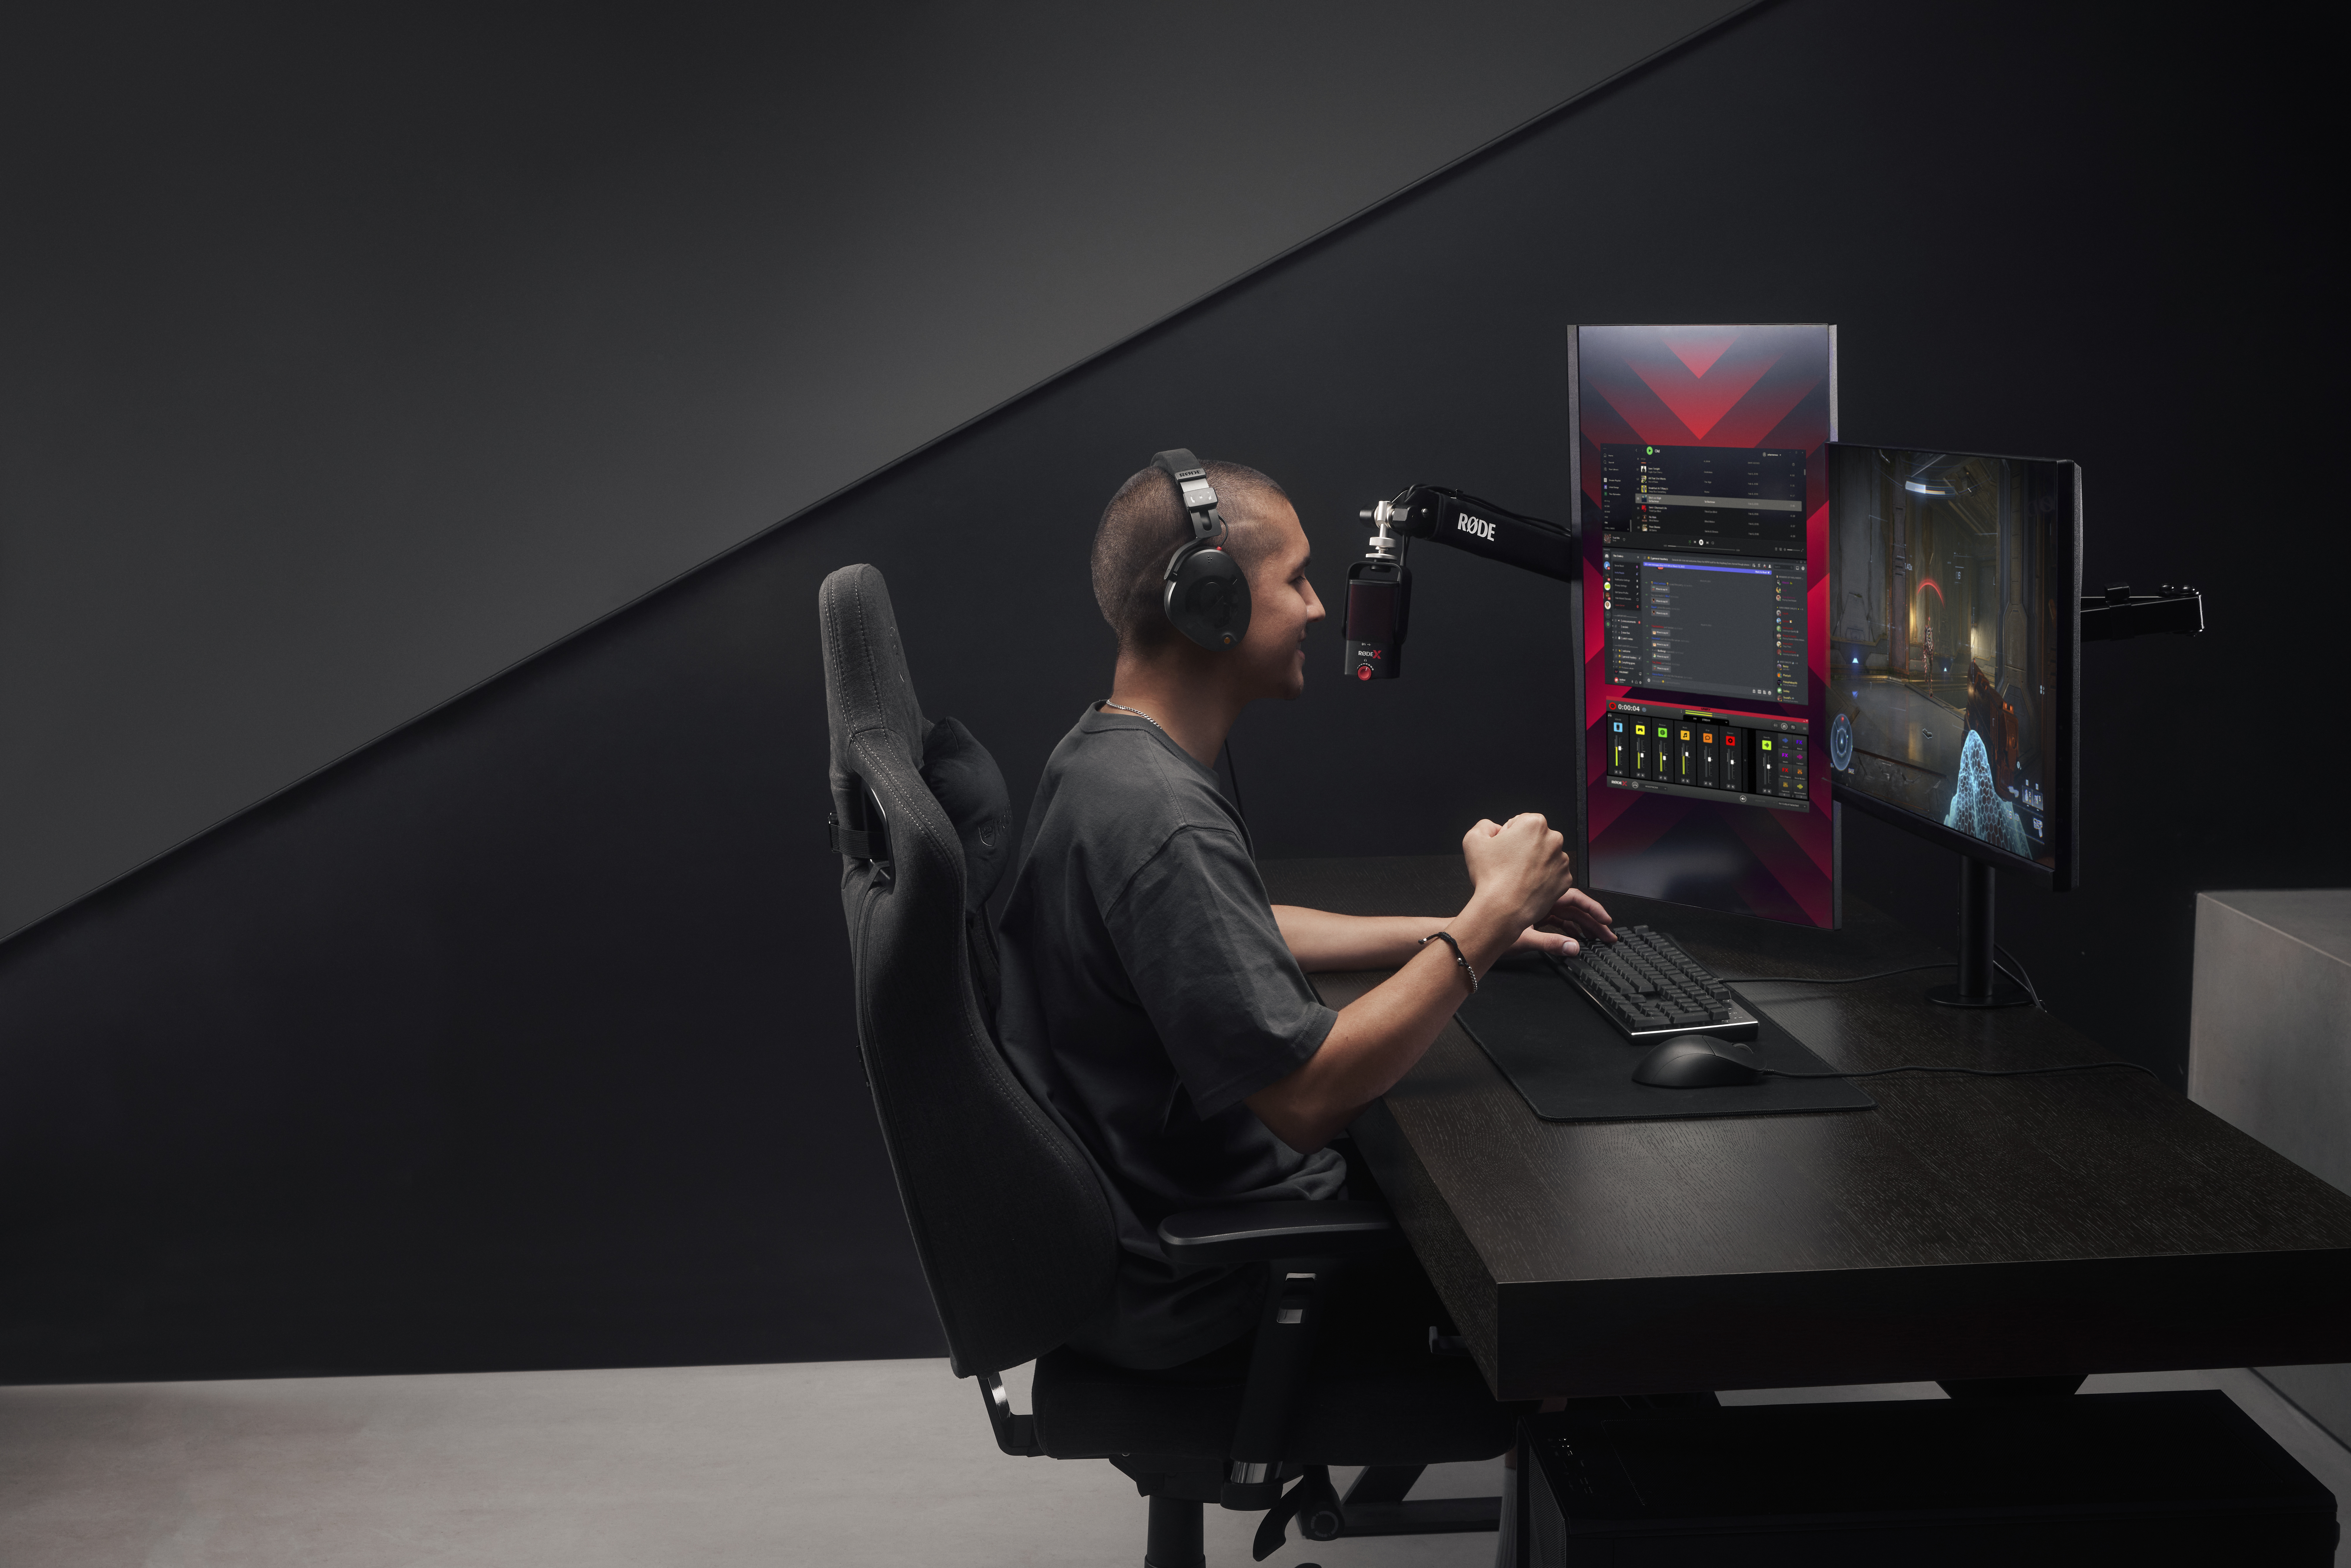 RØDE unveils UNIFY software, 2 new mics and a sub-brand: RØDE X 13